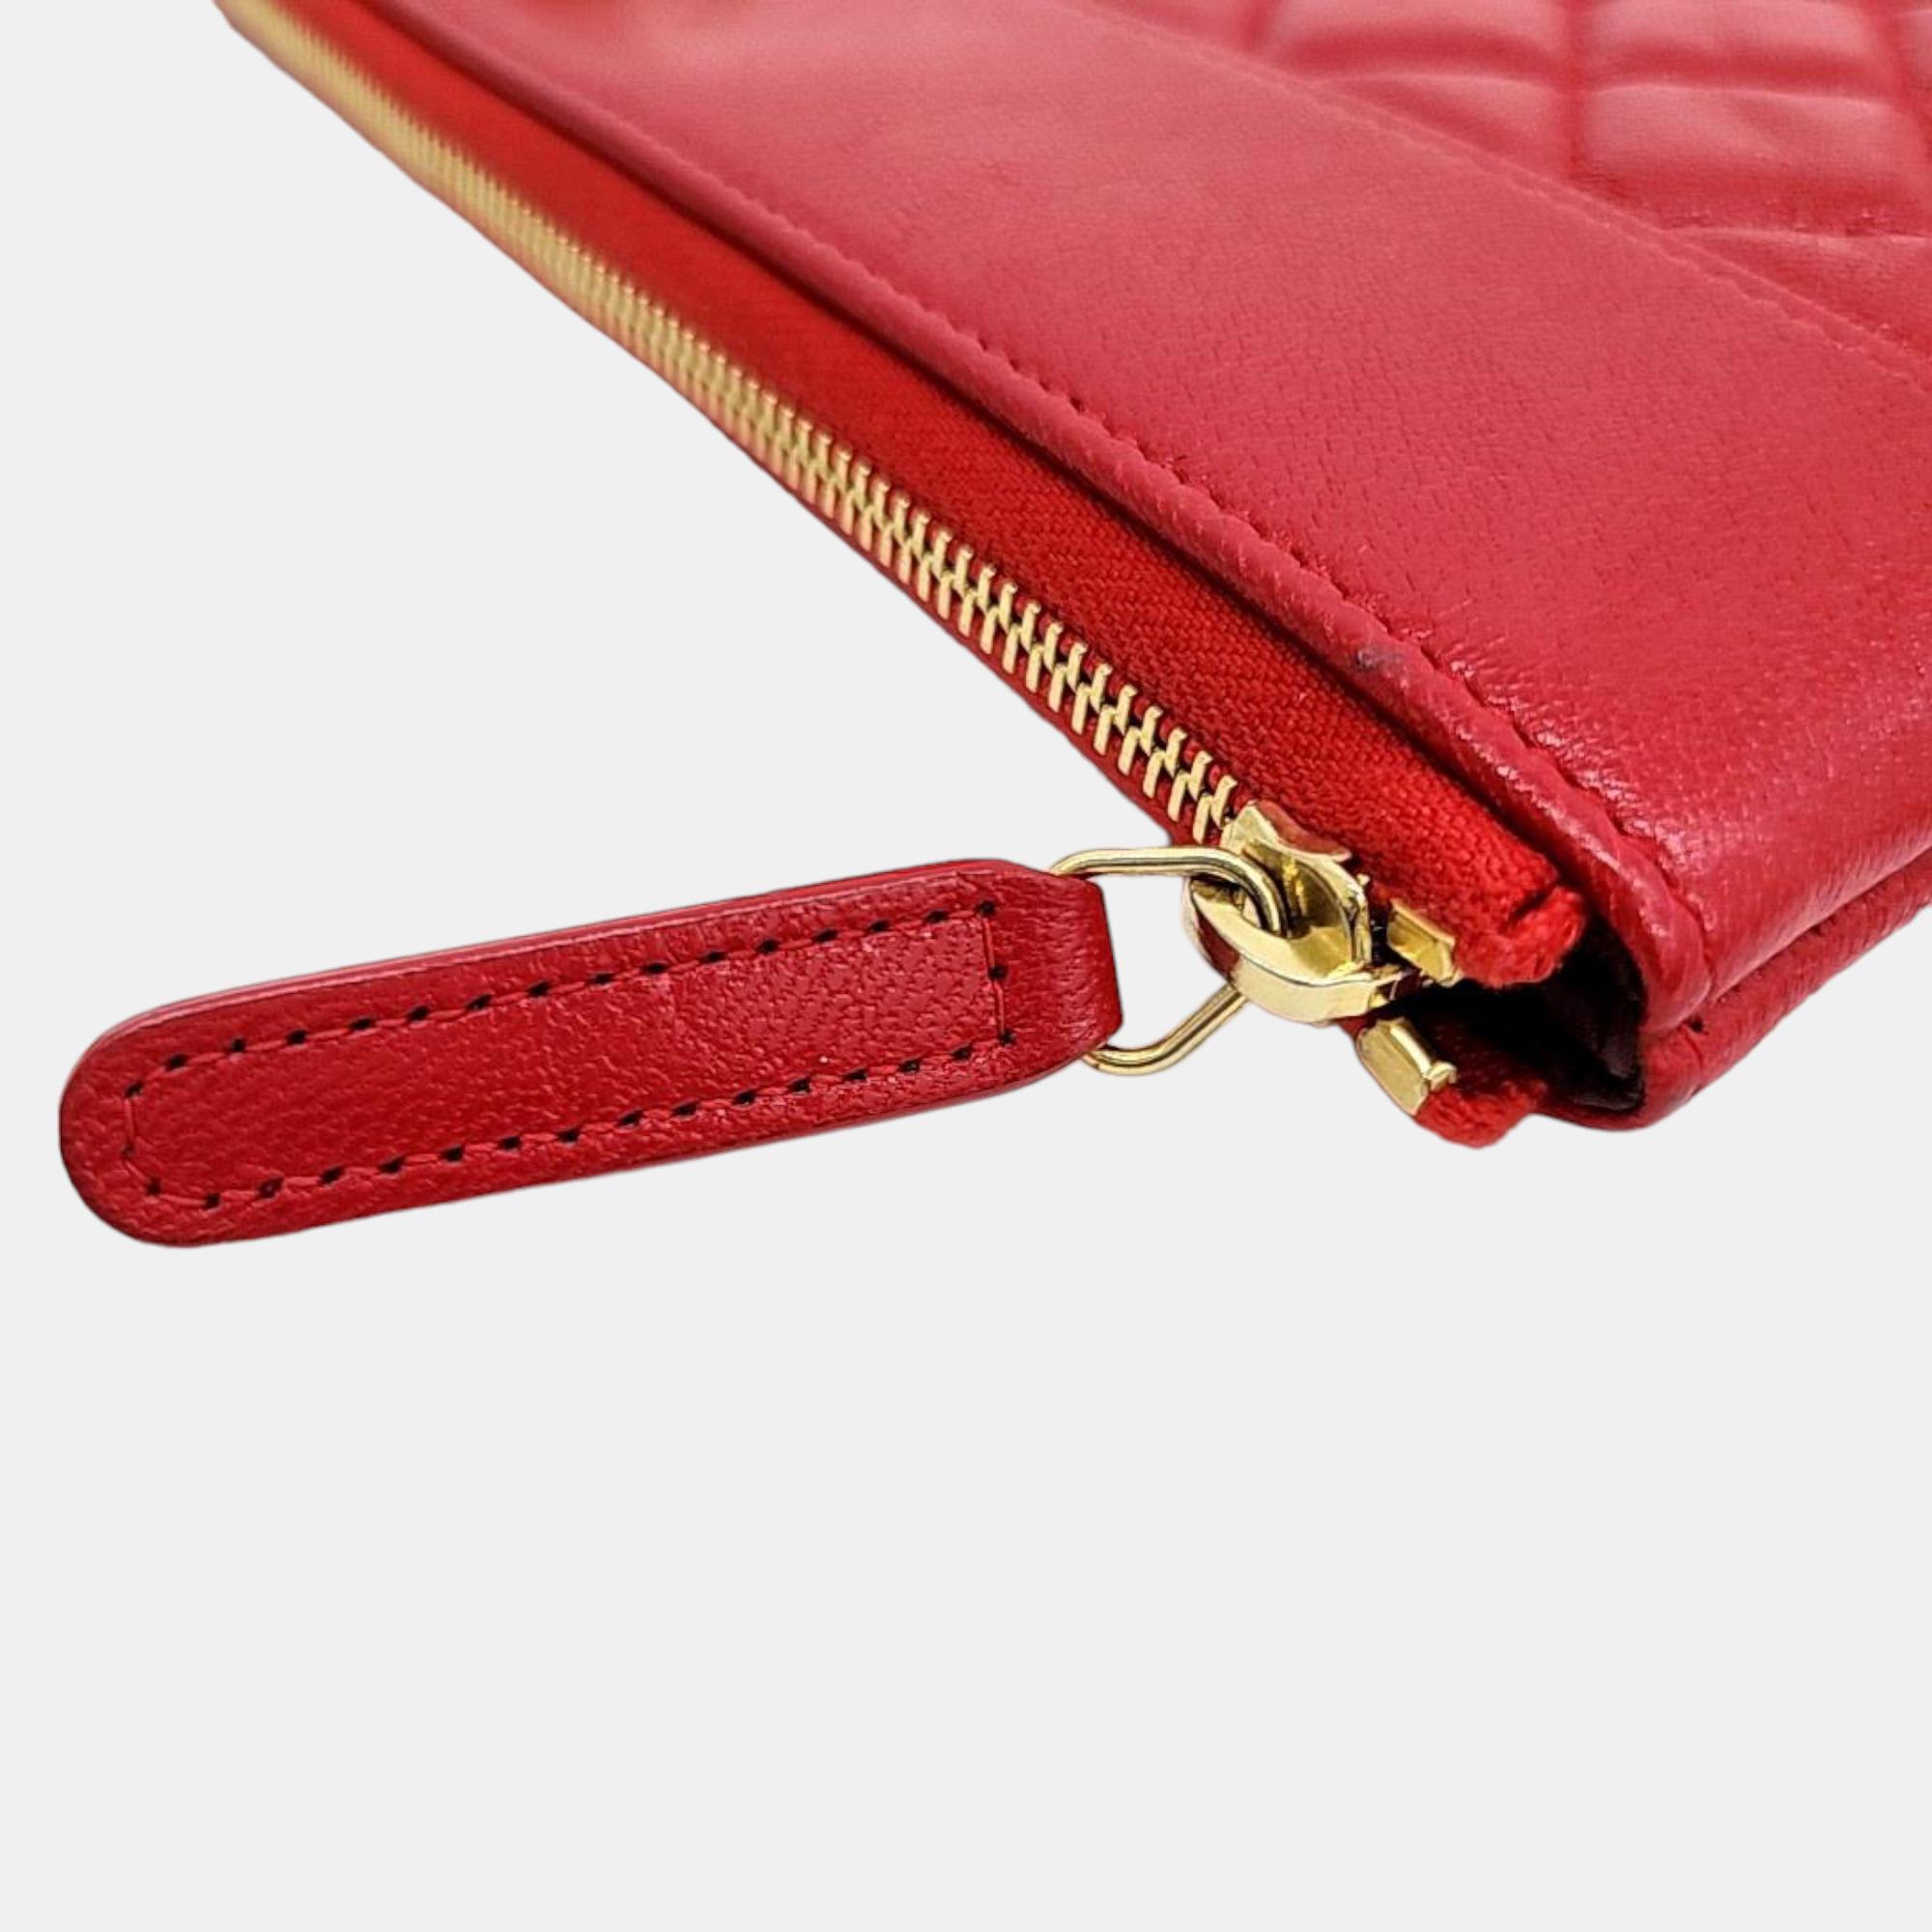 Chanel Red Leather Mademoiselle Clutch